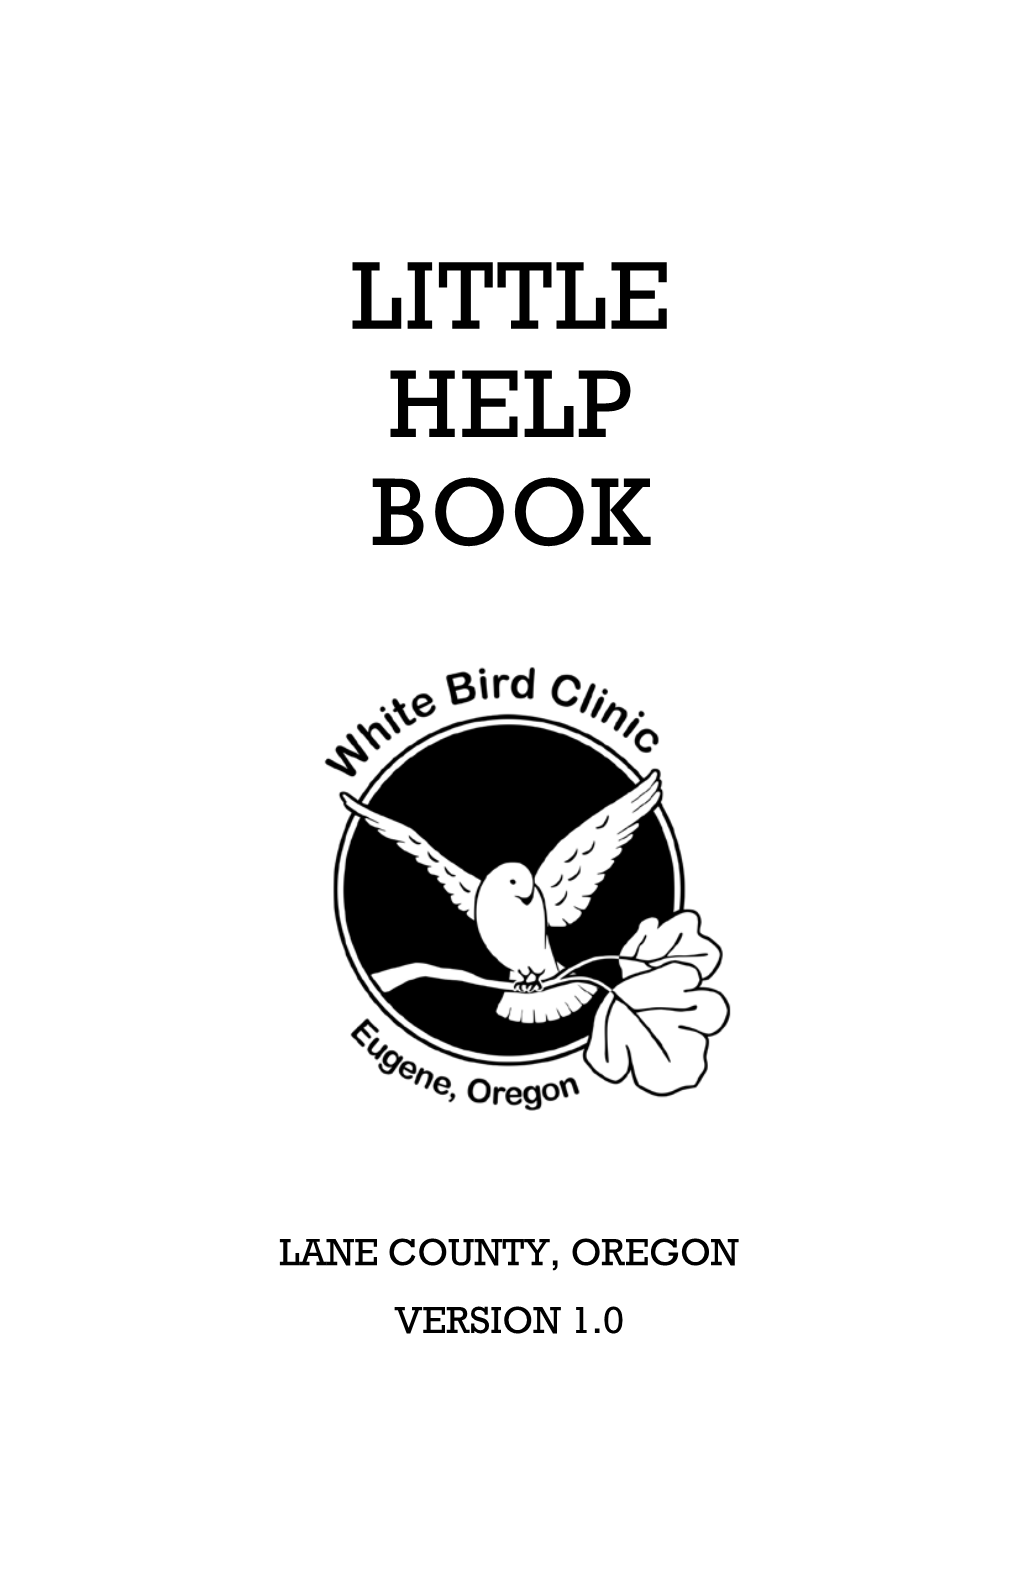 Little Help Book” and Every Service Here Has Provided Us with the Information Included Thanks to the Following Folks and Organizations